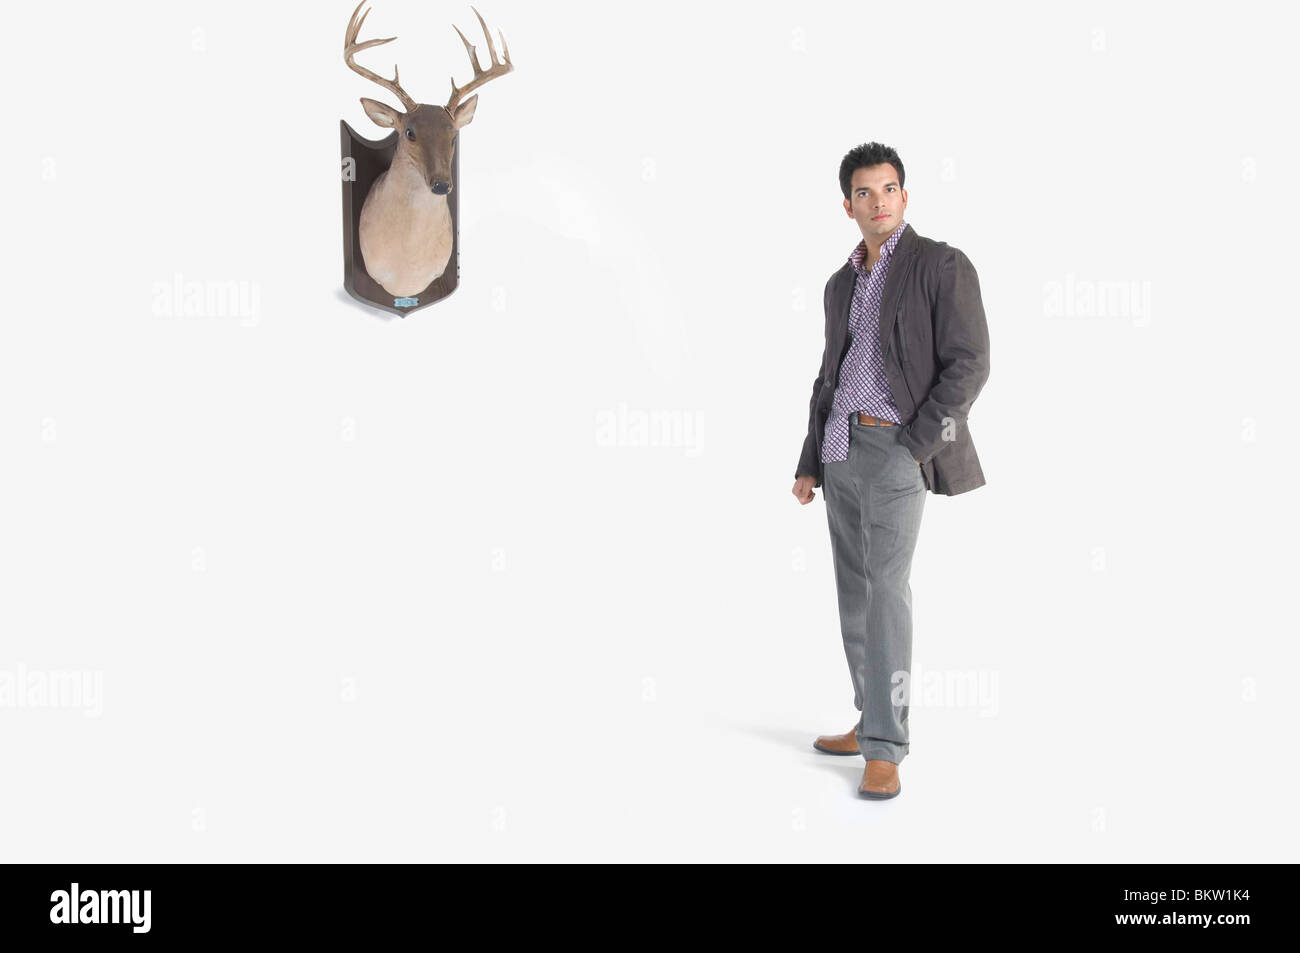 Young man standing by deer head Stock Photo